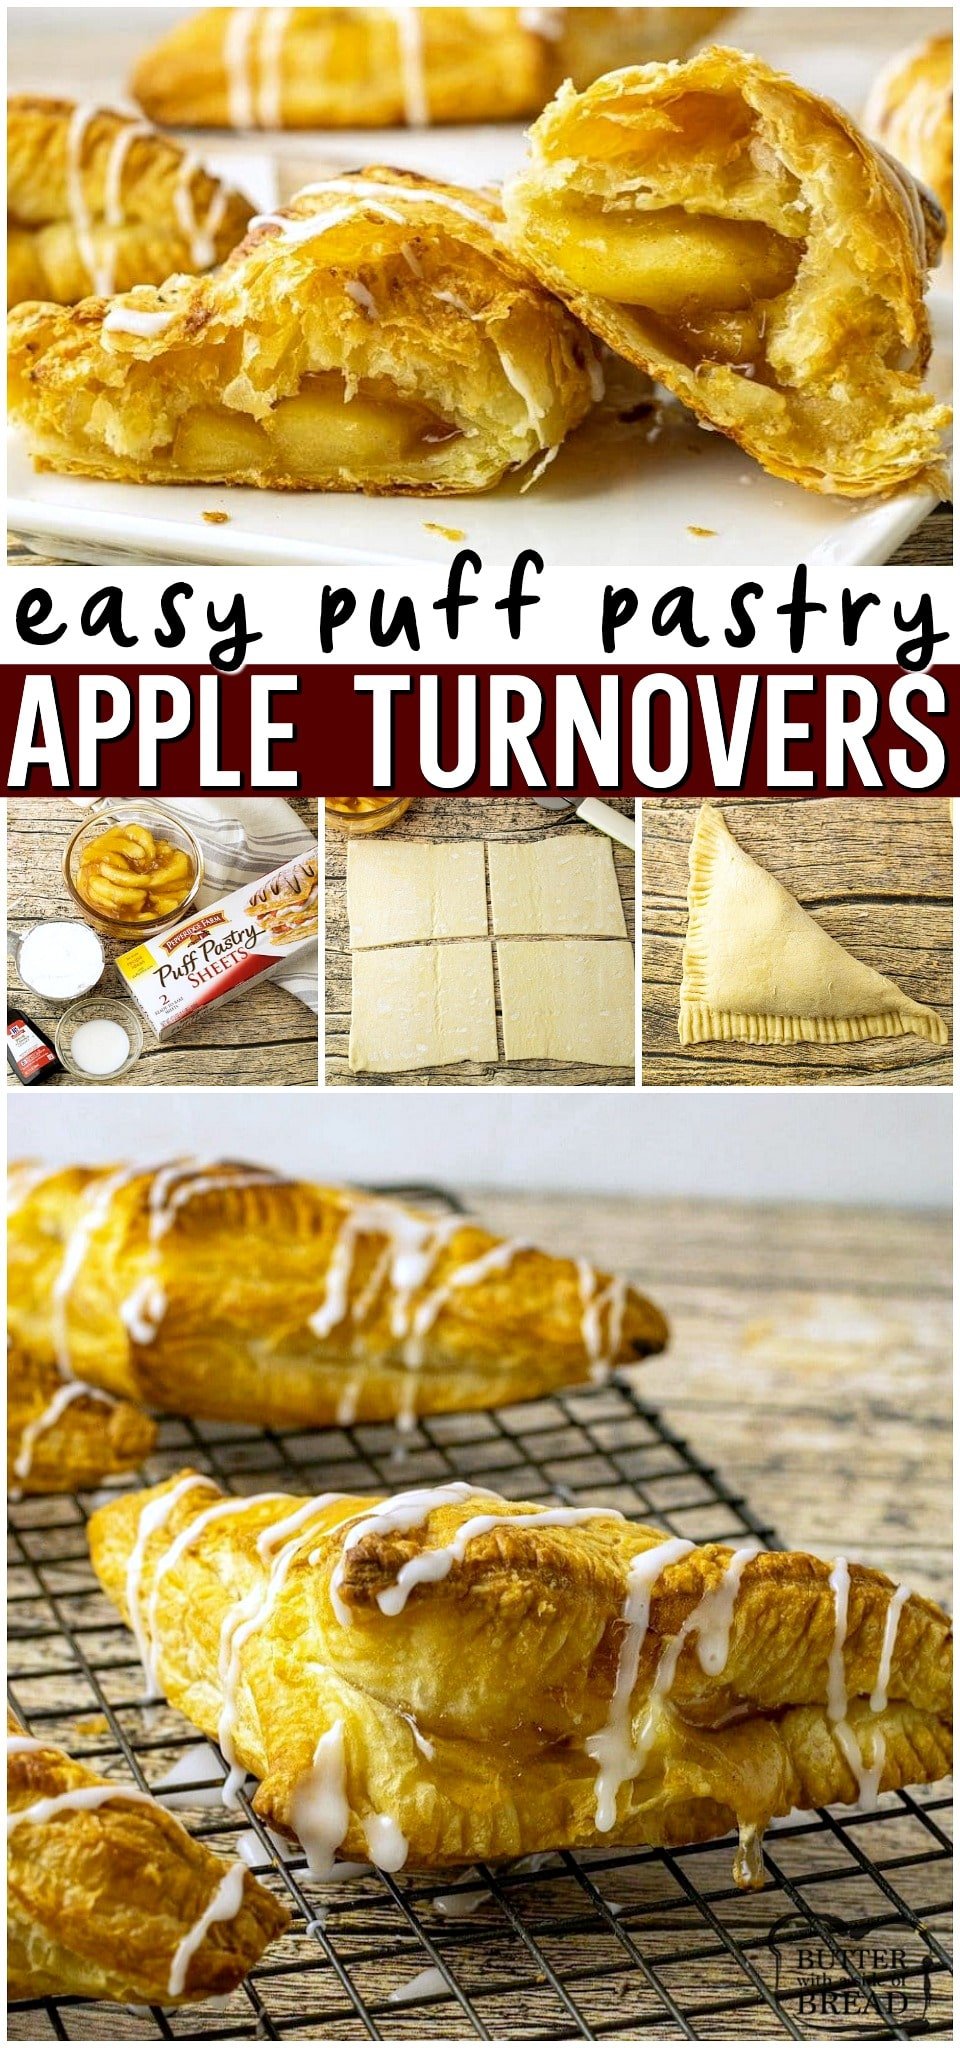 Easy Apple Turnovers made with puff pastry & apple pie filling for a simple, delicious apple dessert. Puff Pastry Apple Turnover Recipe is made in minutes & topped with a delicious almond glaze.